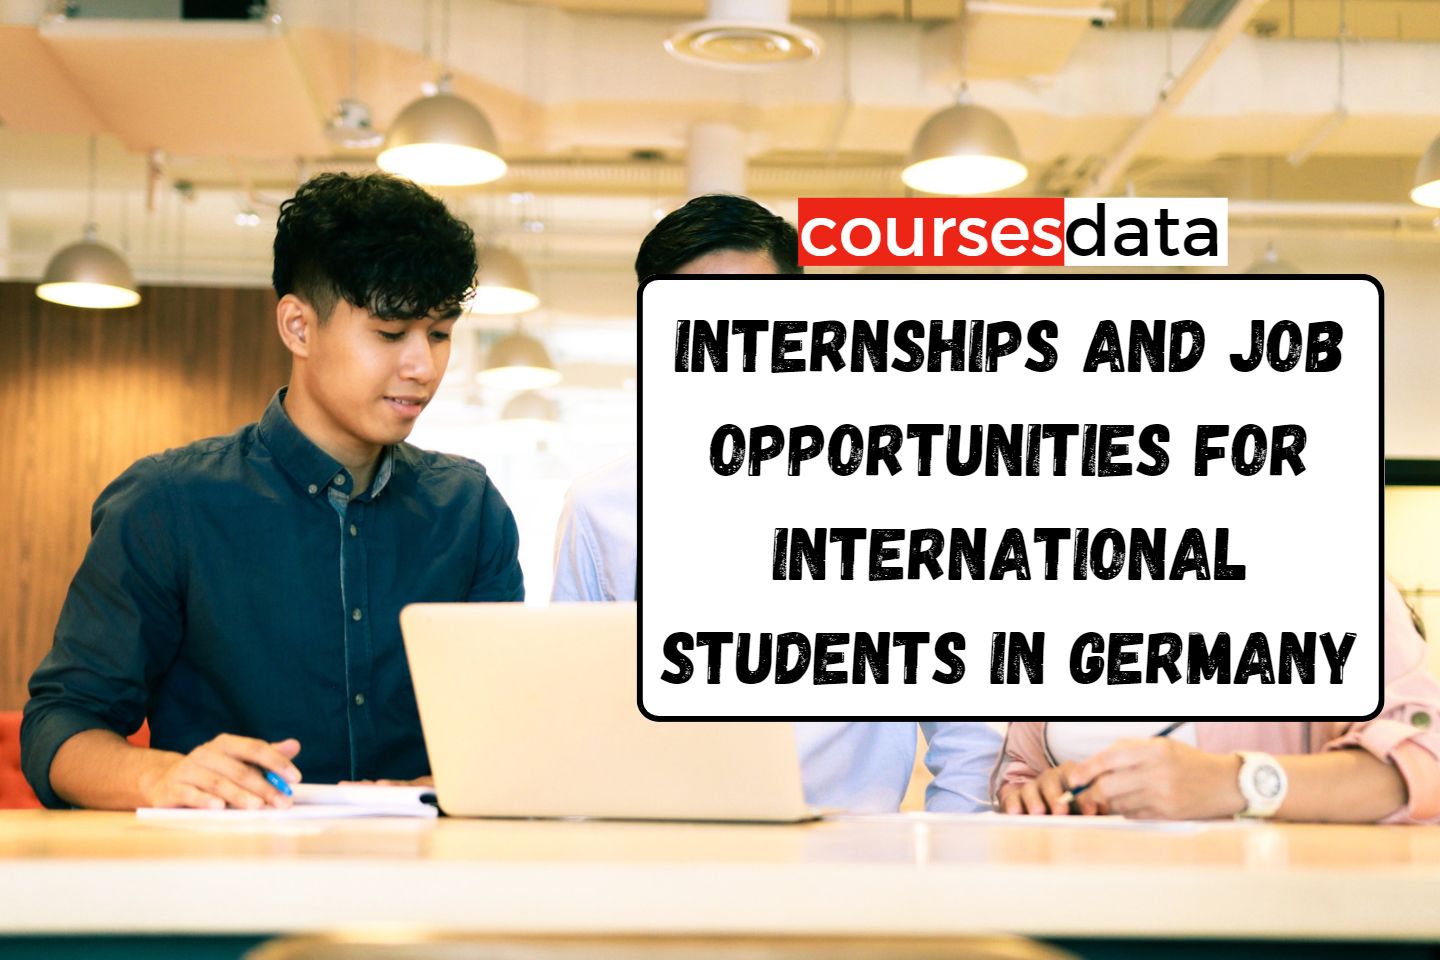 Internships and Job Opportunities for International Students in Germany